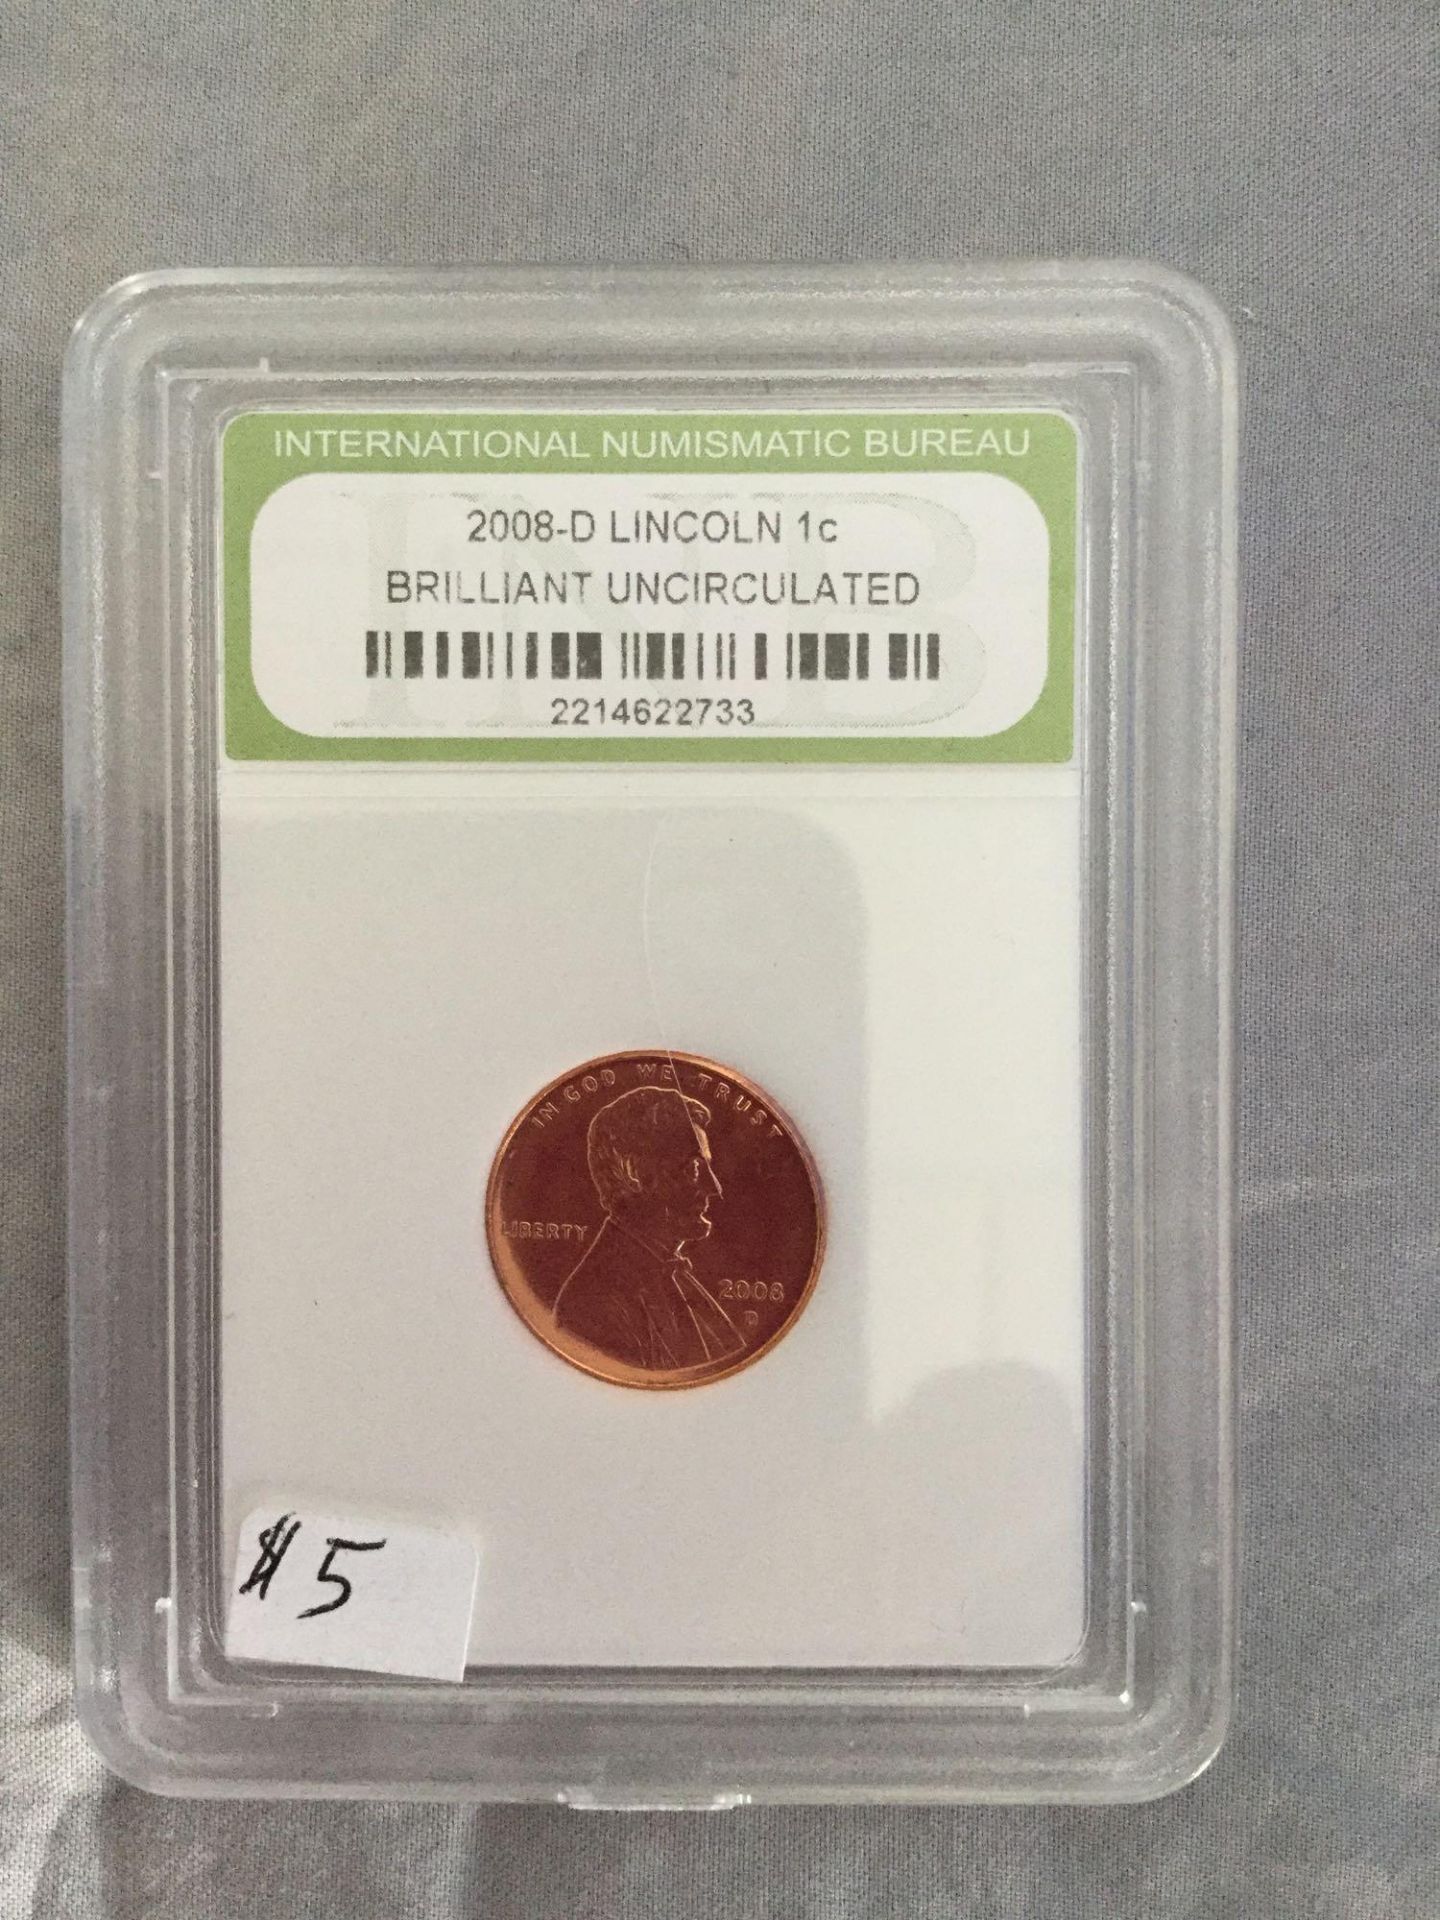 2008-D - US Lincoln one Cent Coin - Brilliant Uncirculated